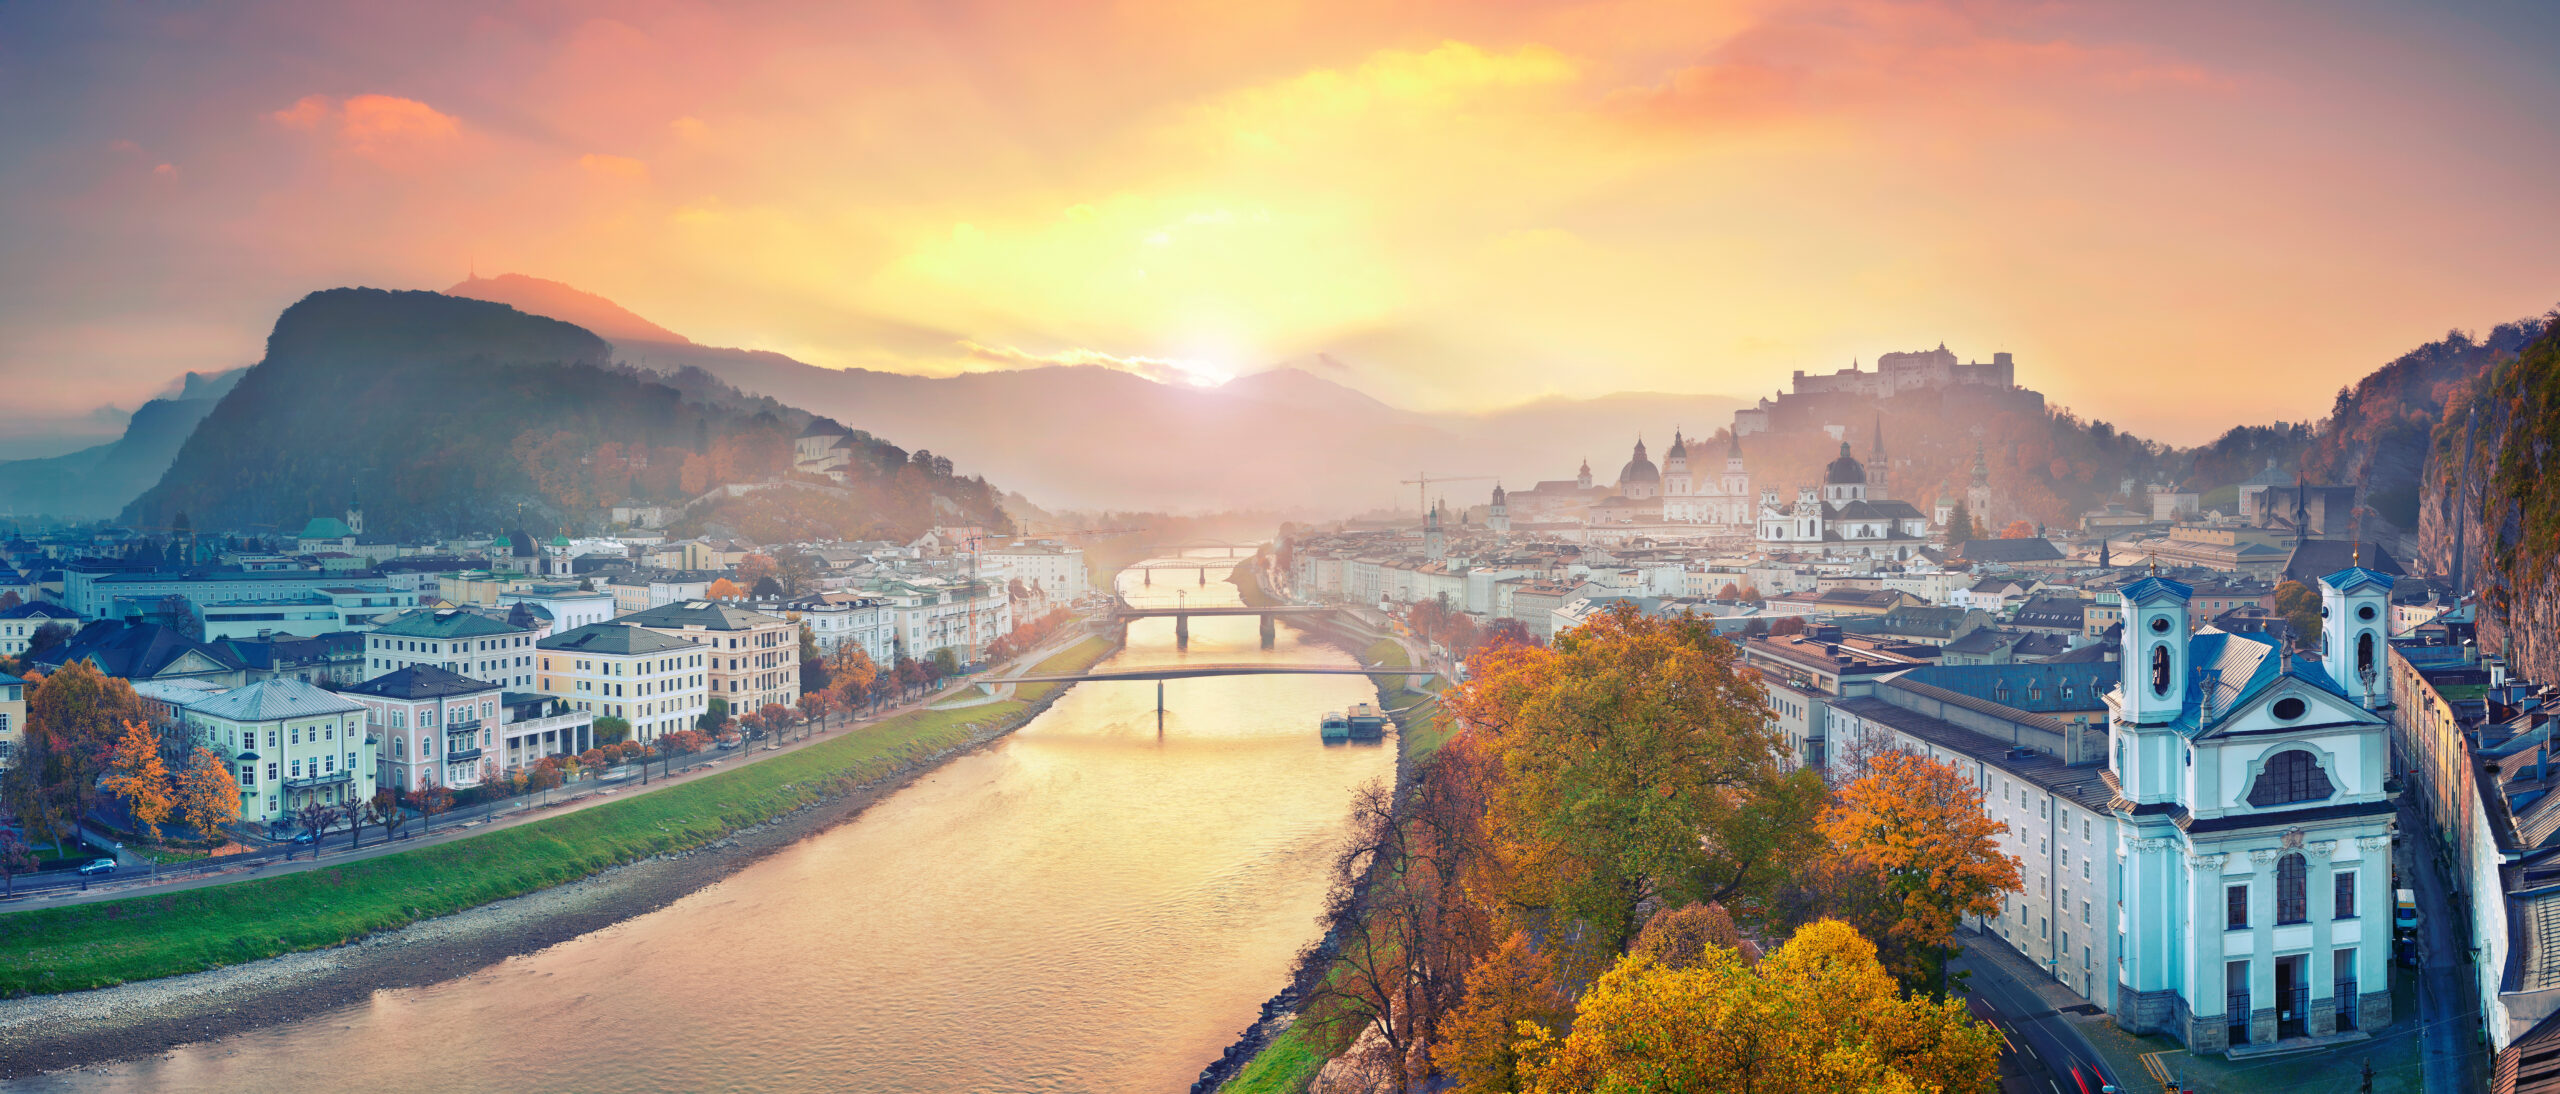 Panoramic image of town along river during autumn